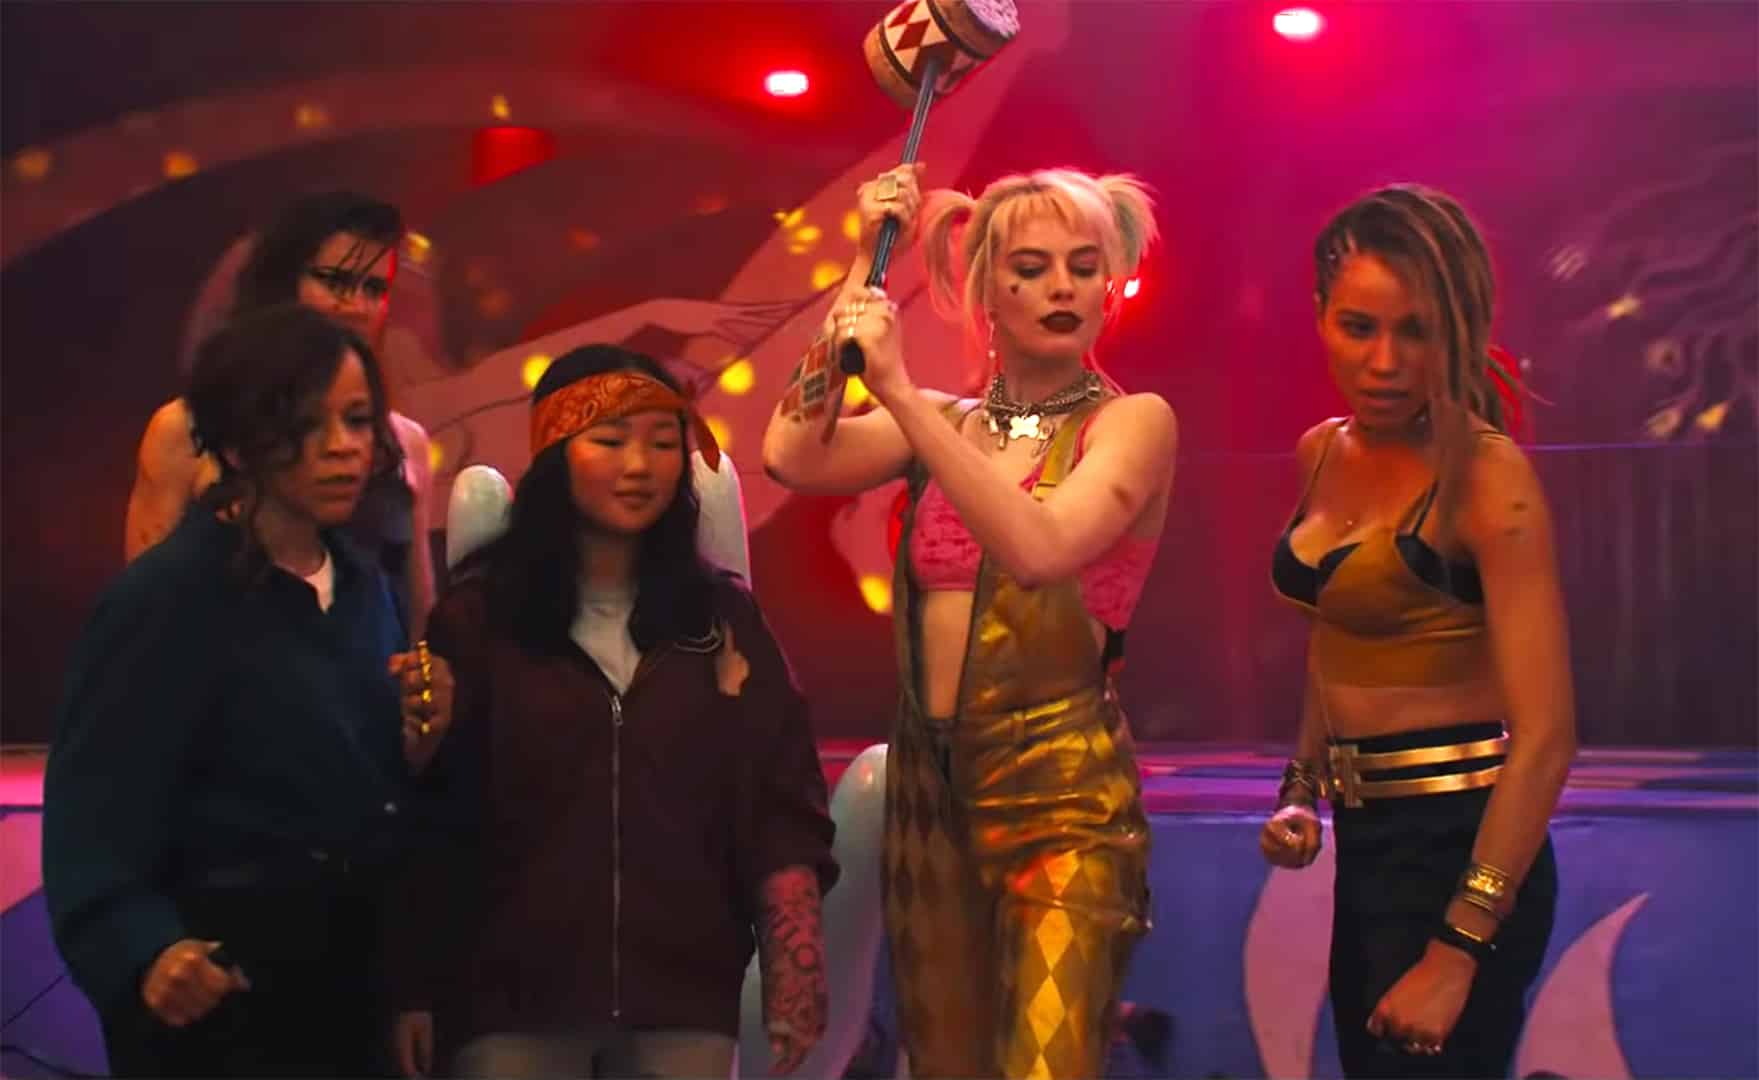 Birds of Prey Harley Quinn box office disappointing reasons why explanation